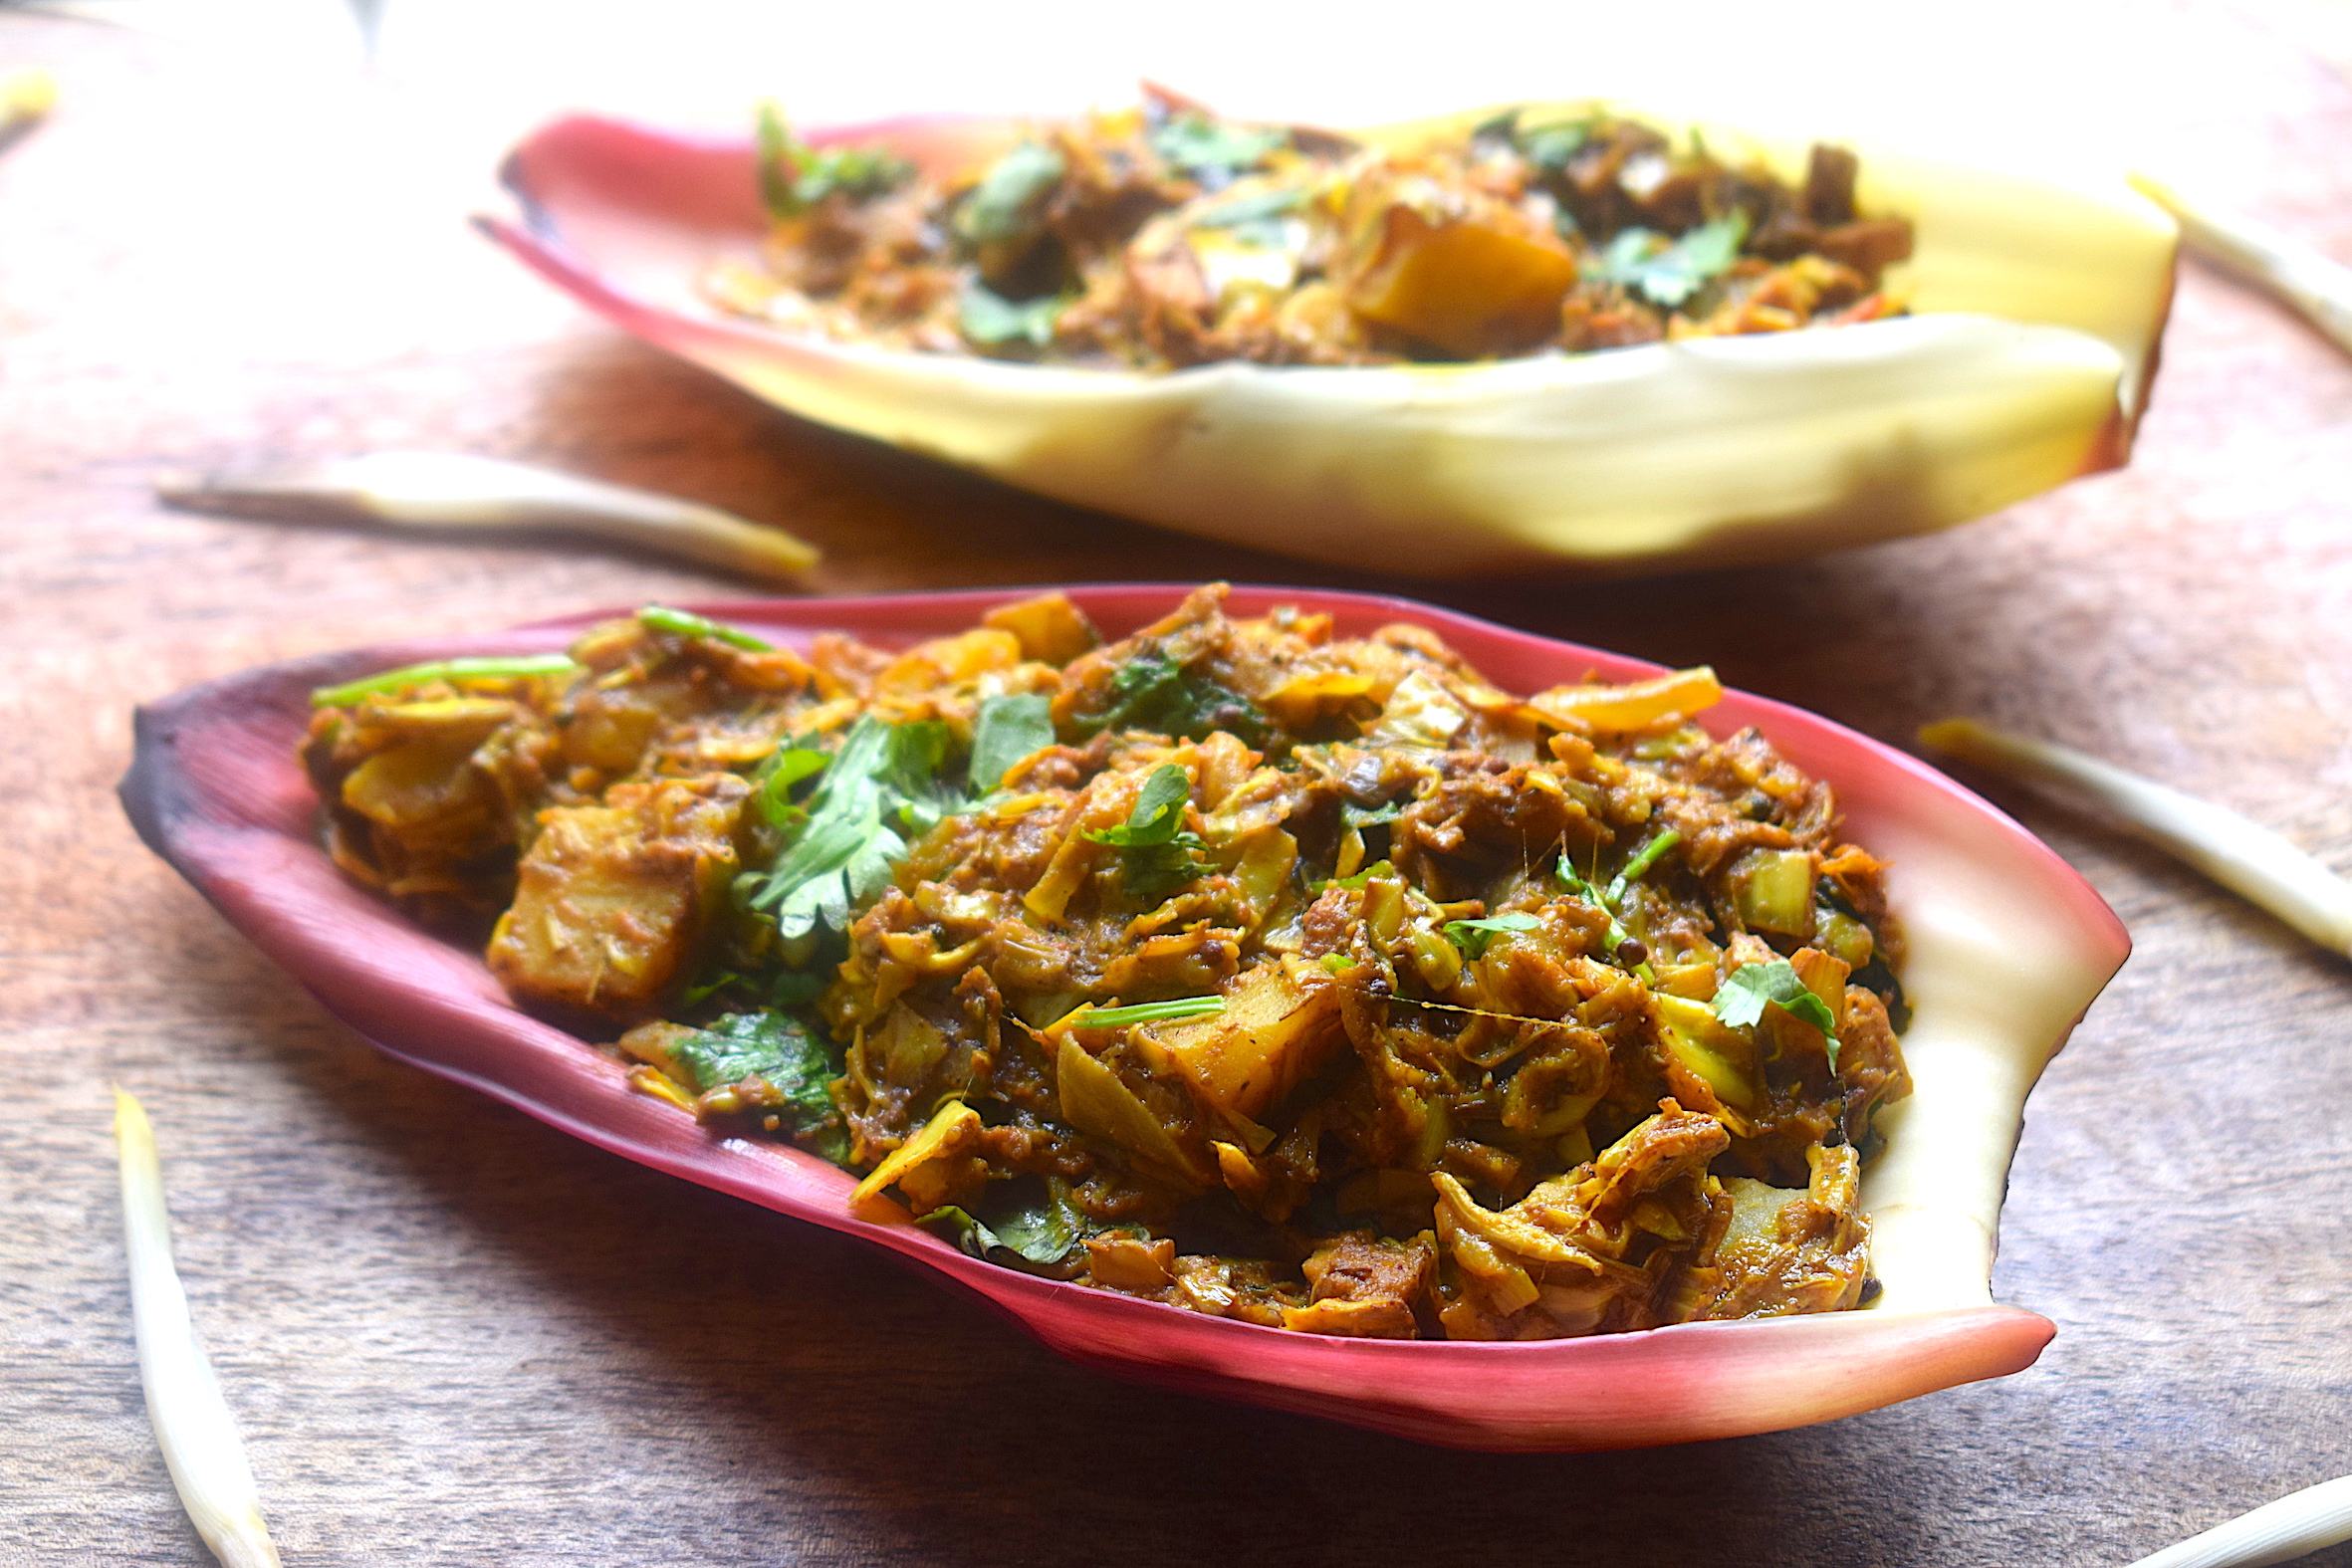 Banana Flower With Potatoes Recipes For The Regular Homecook,Corn Snakes For Sale